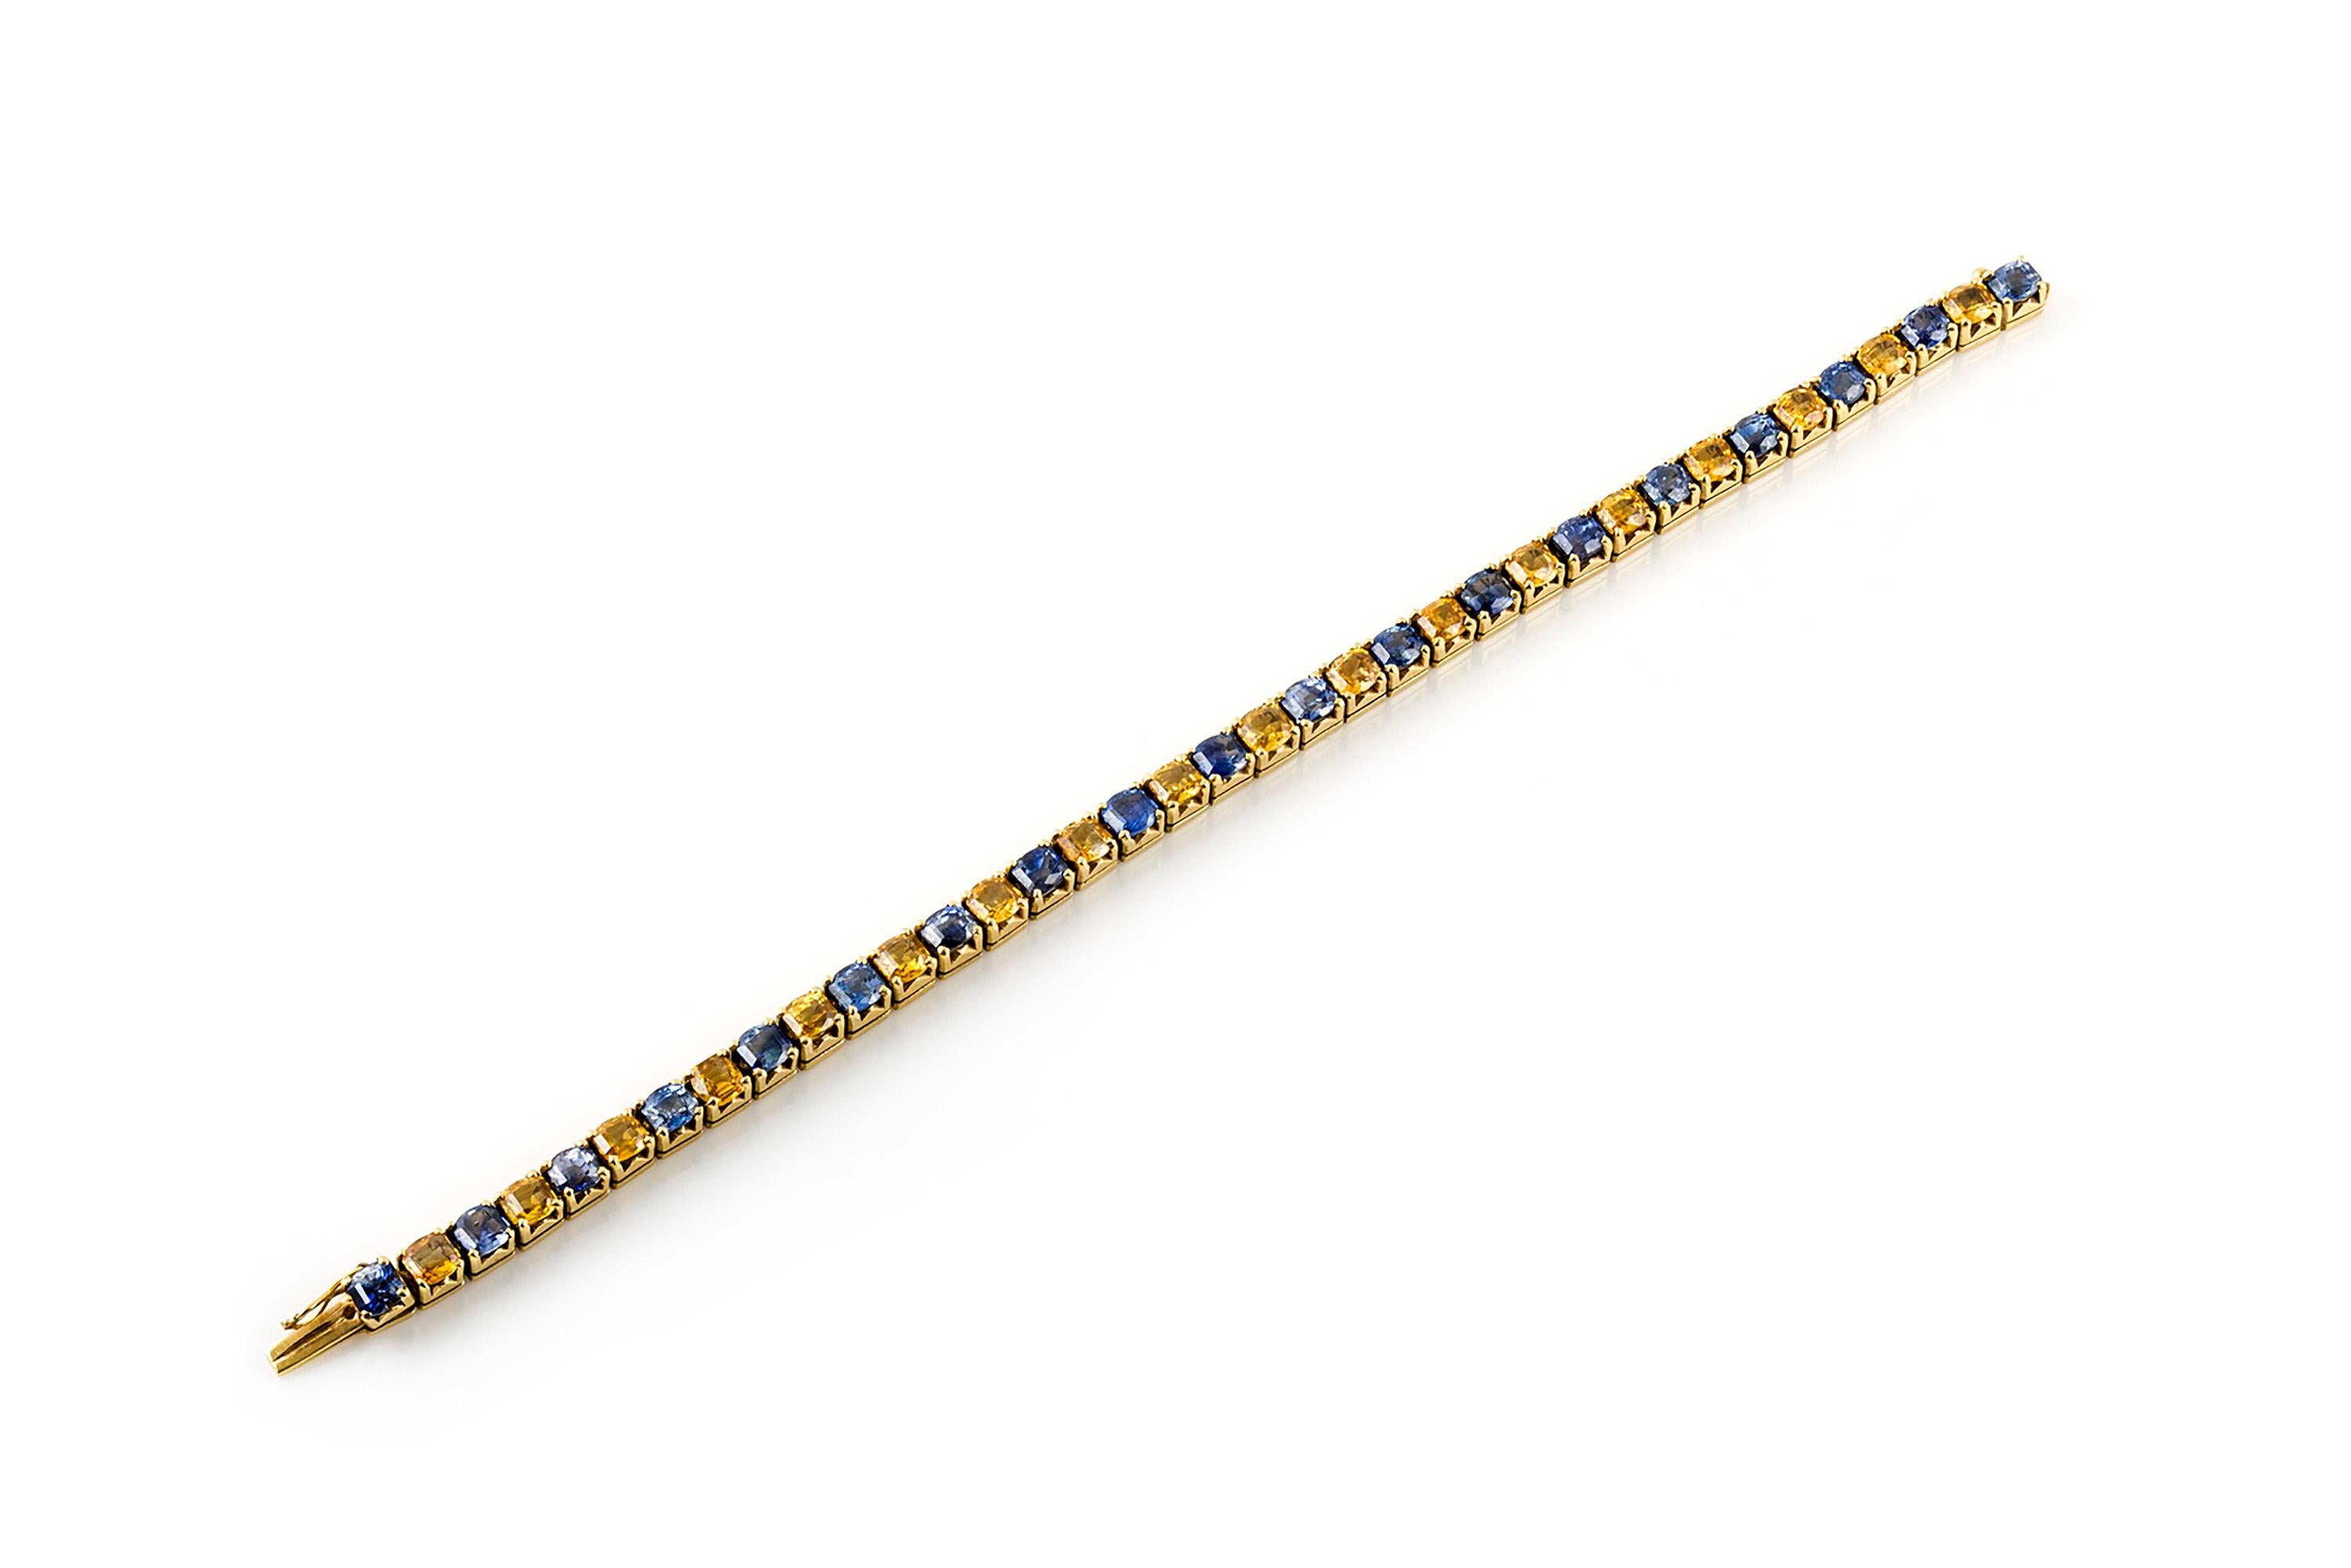 Tennis bracelet, finely crafted in gold with blue and yellow sapphires weighing a total of 34.20 carat. Length of bracelet is 7.5 inch/ 18.5 cm. Circa 1970's.